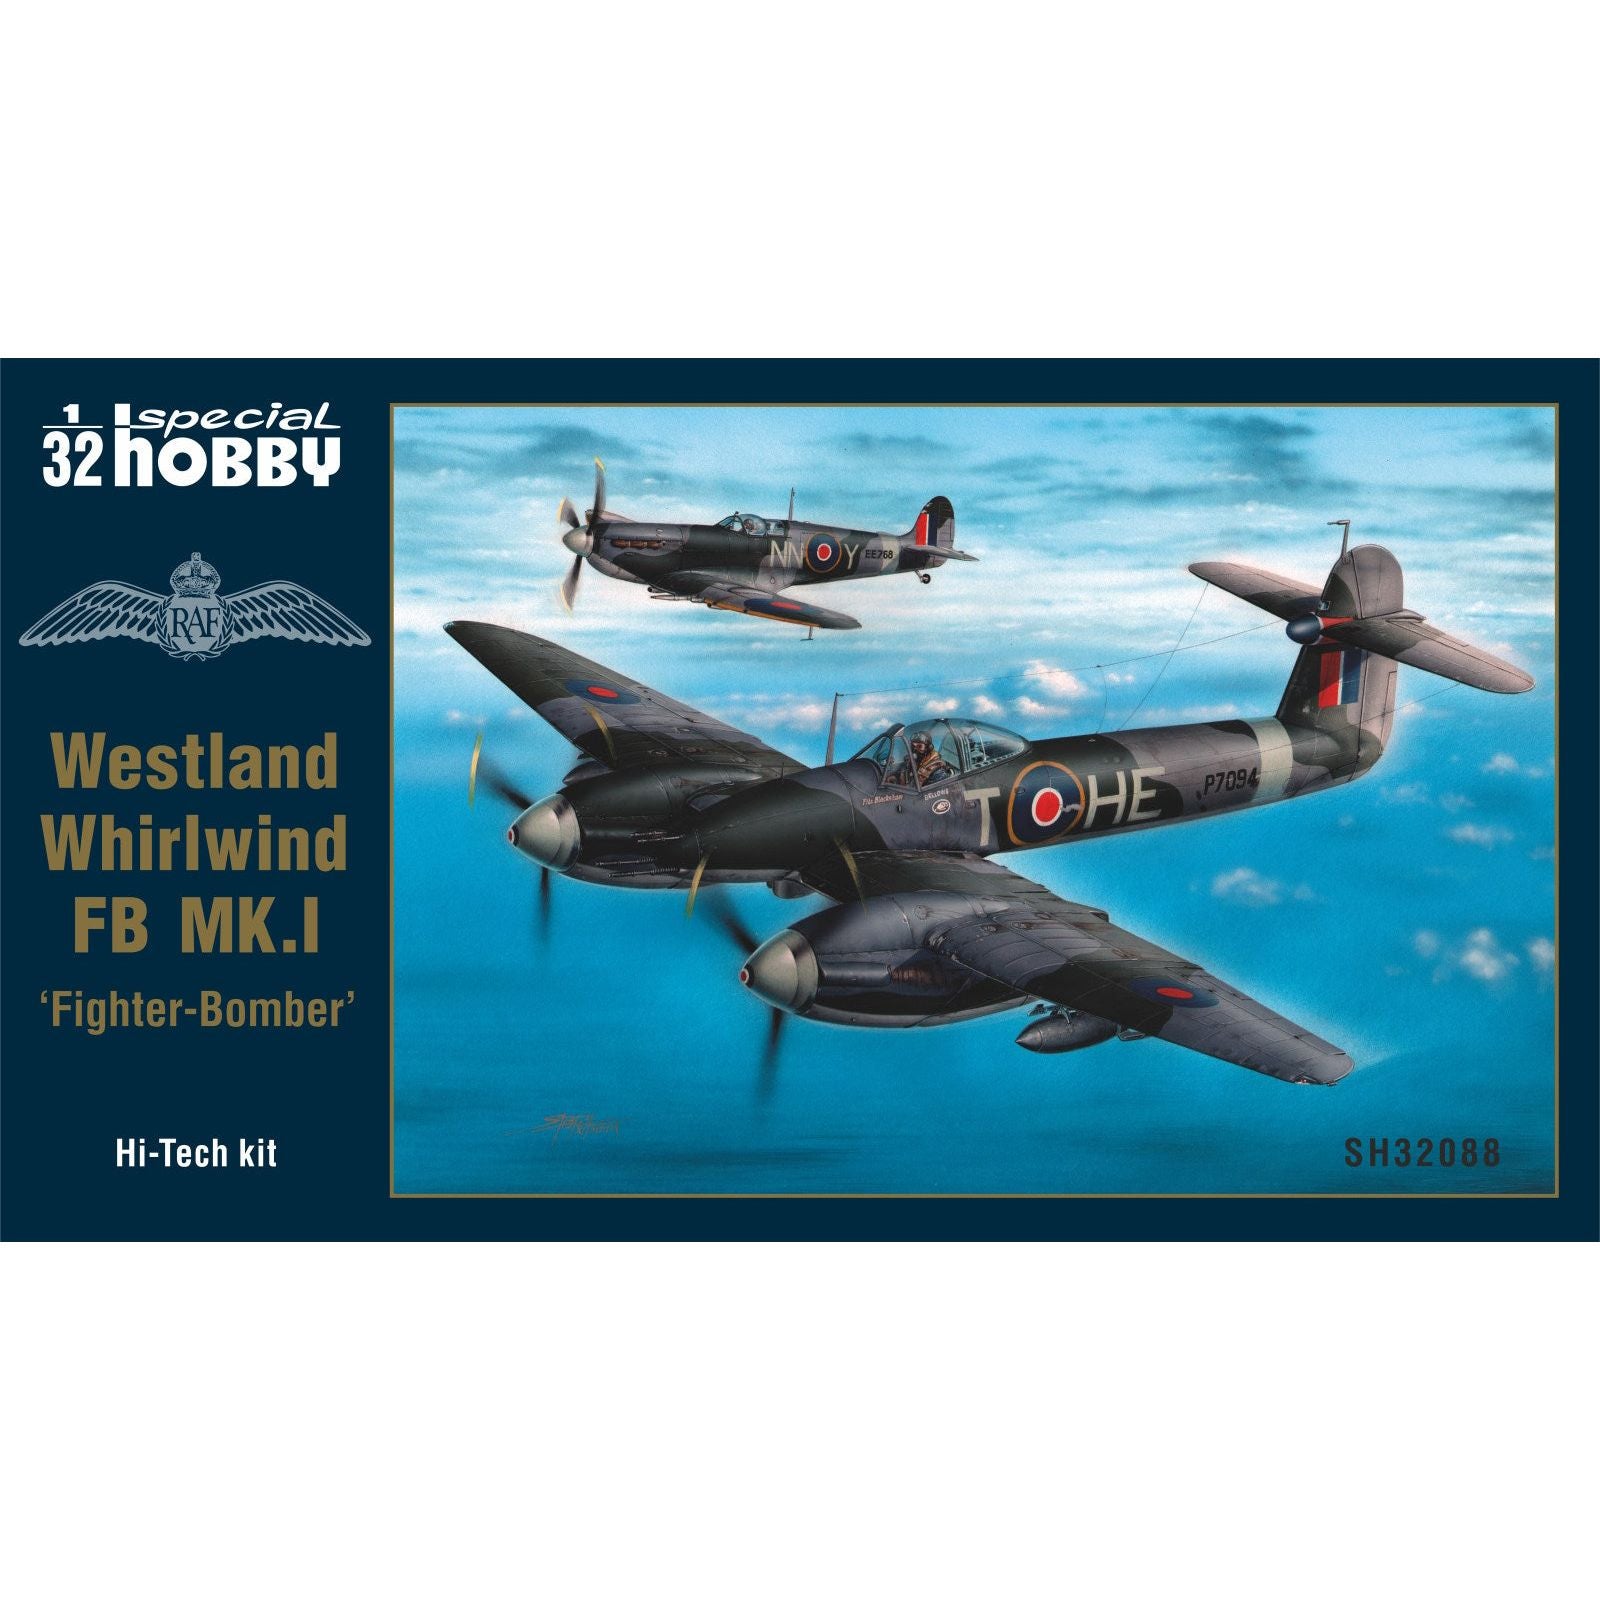 SPECIAL HOBBY 1/32 Westland Whirlwind FB MK.I Fighter-Bomber